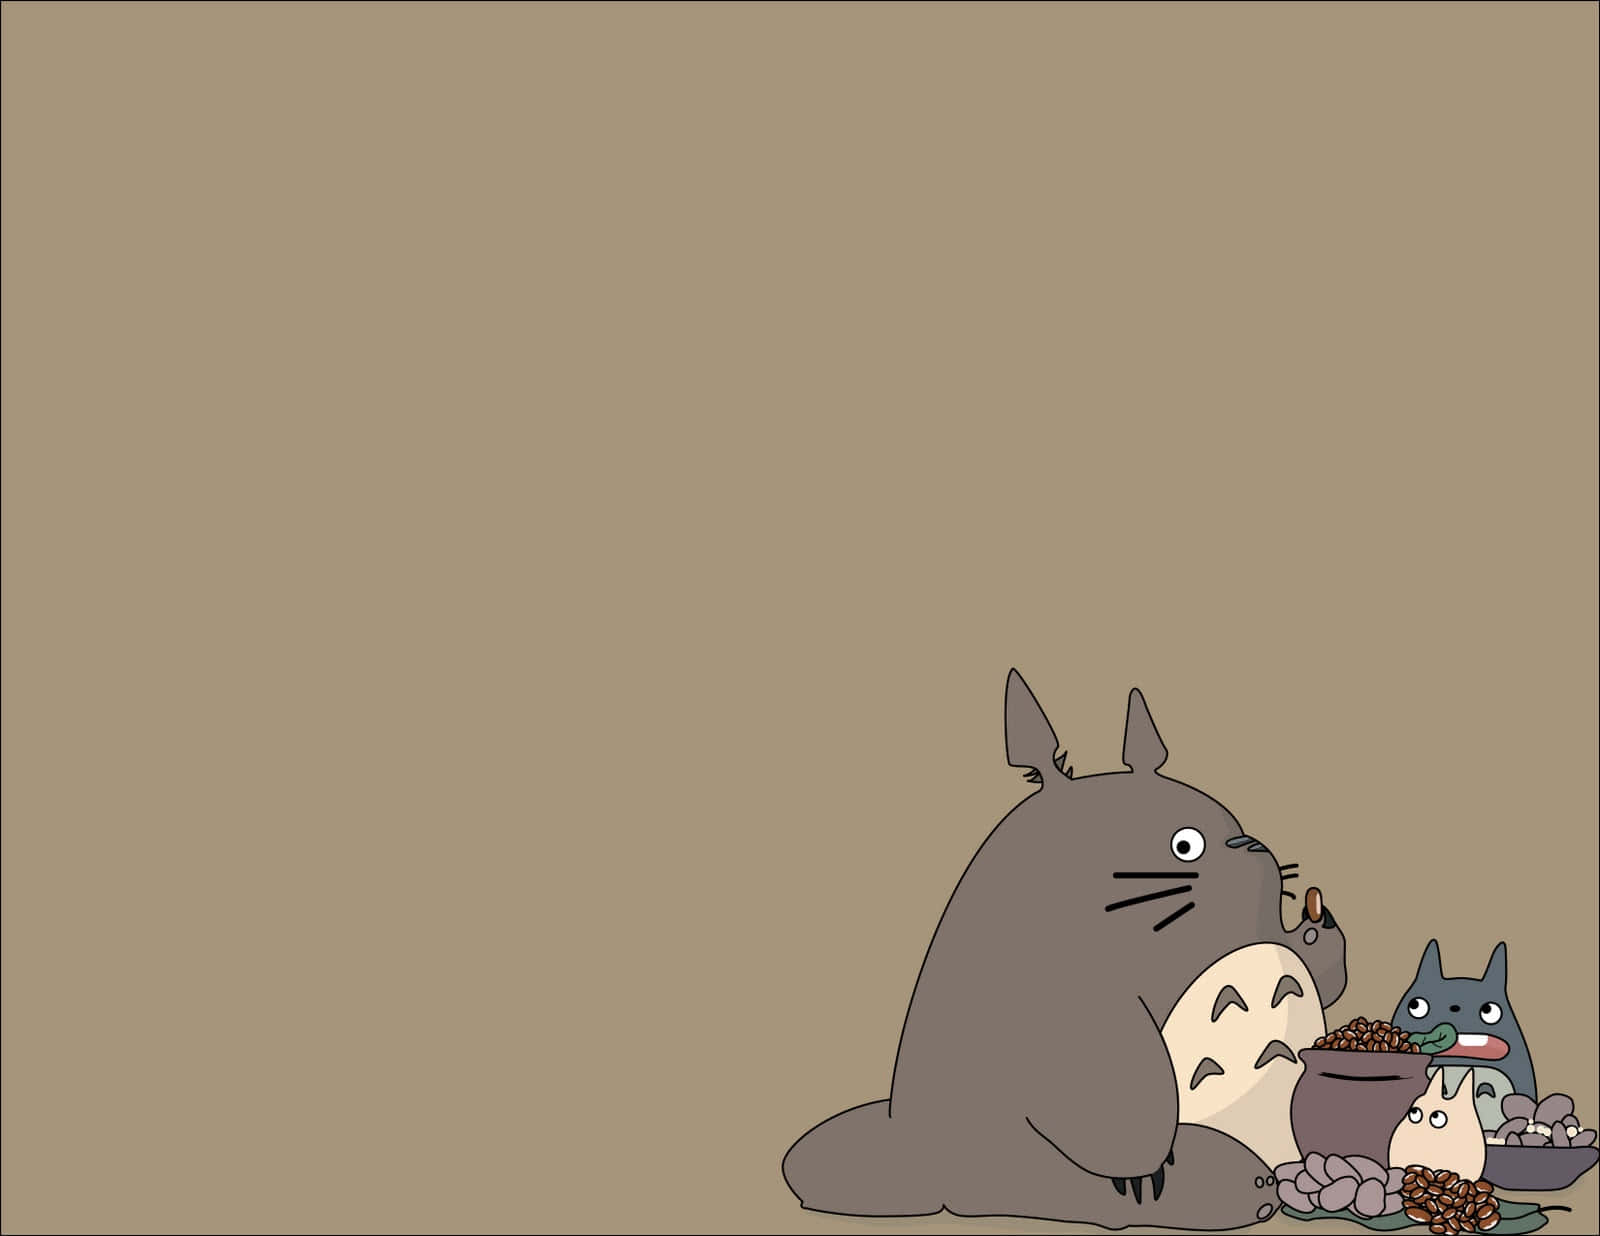 Welcome to the magical world of Totoro